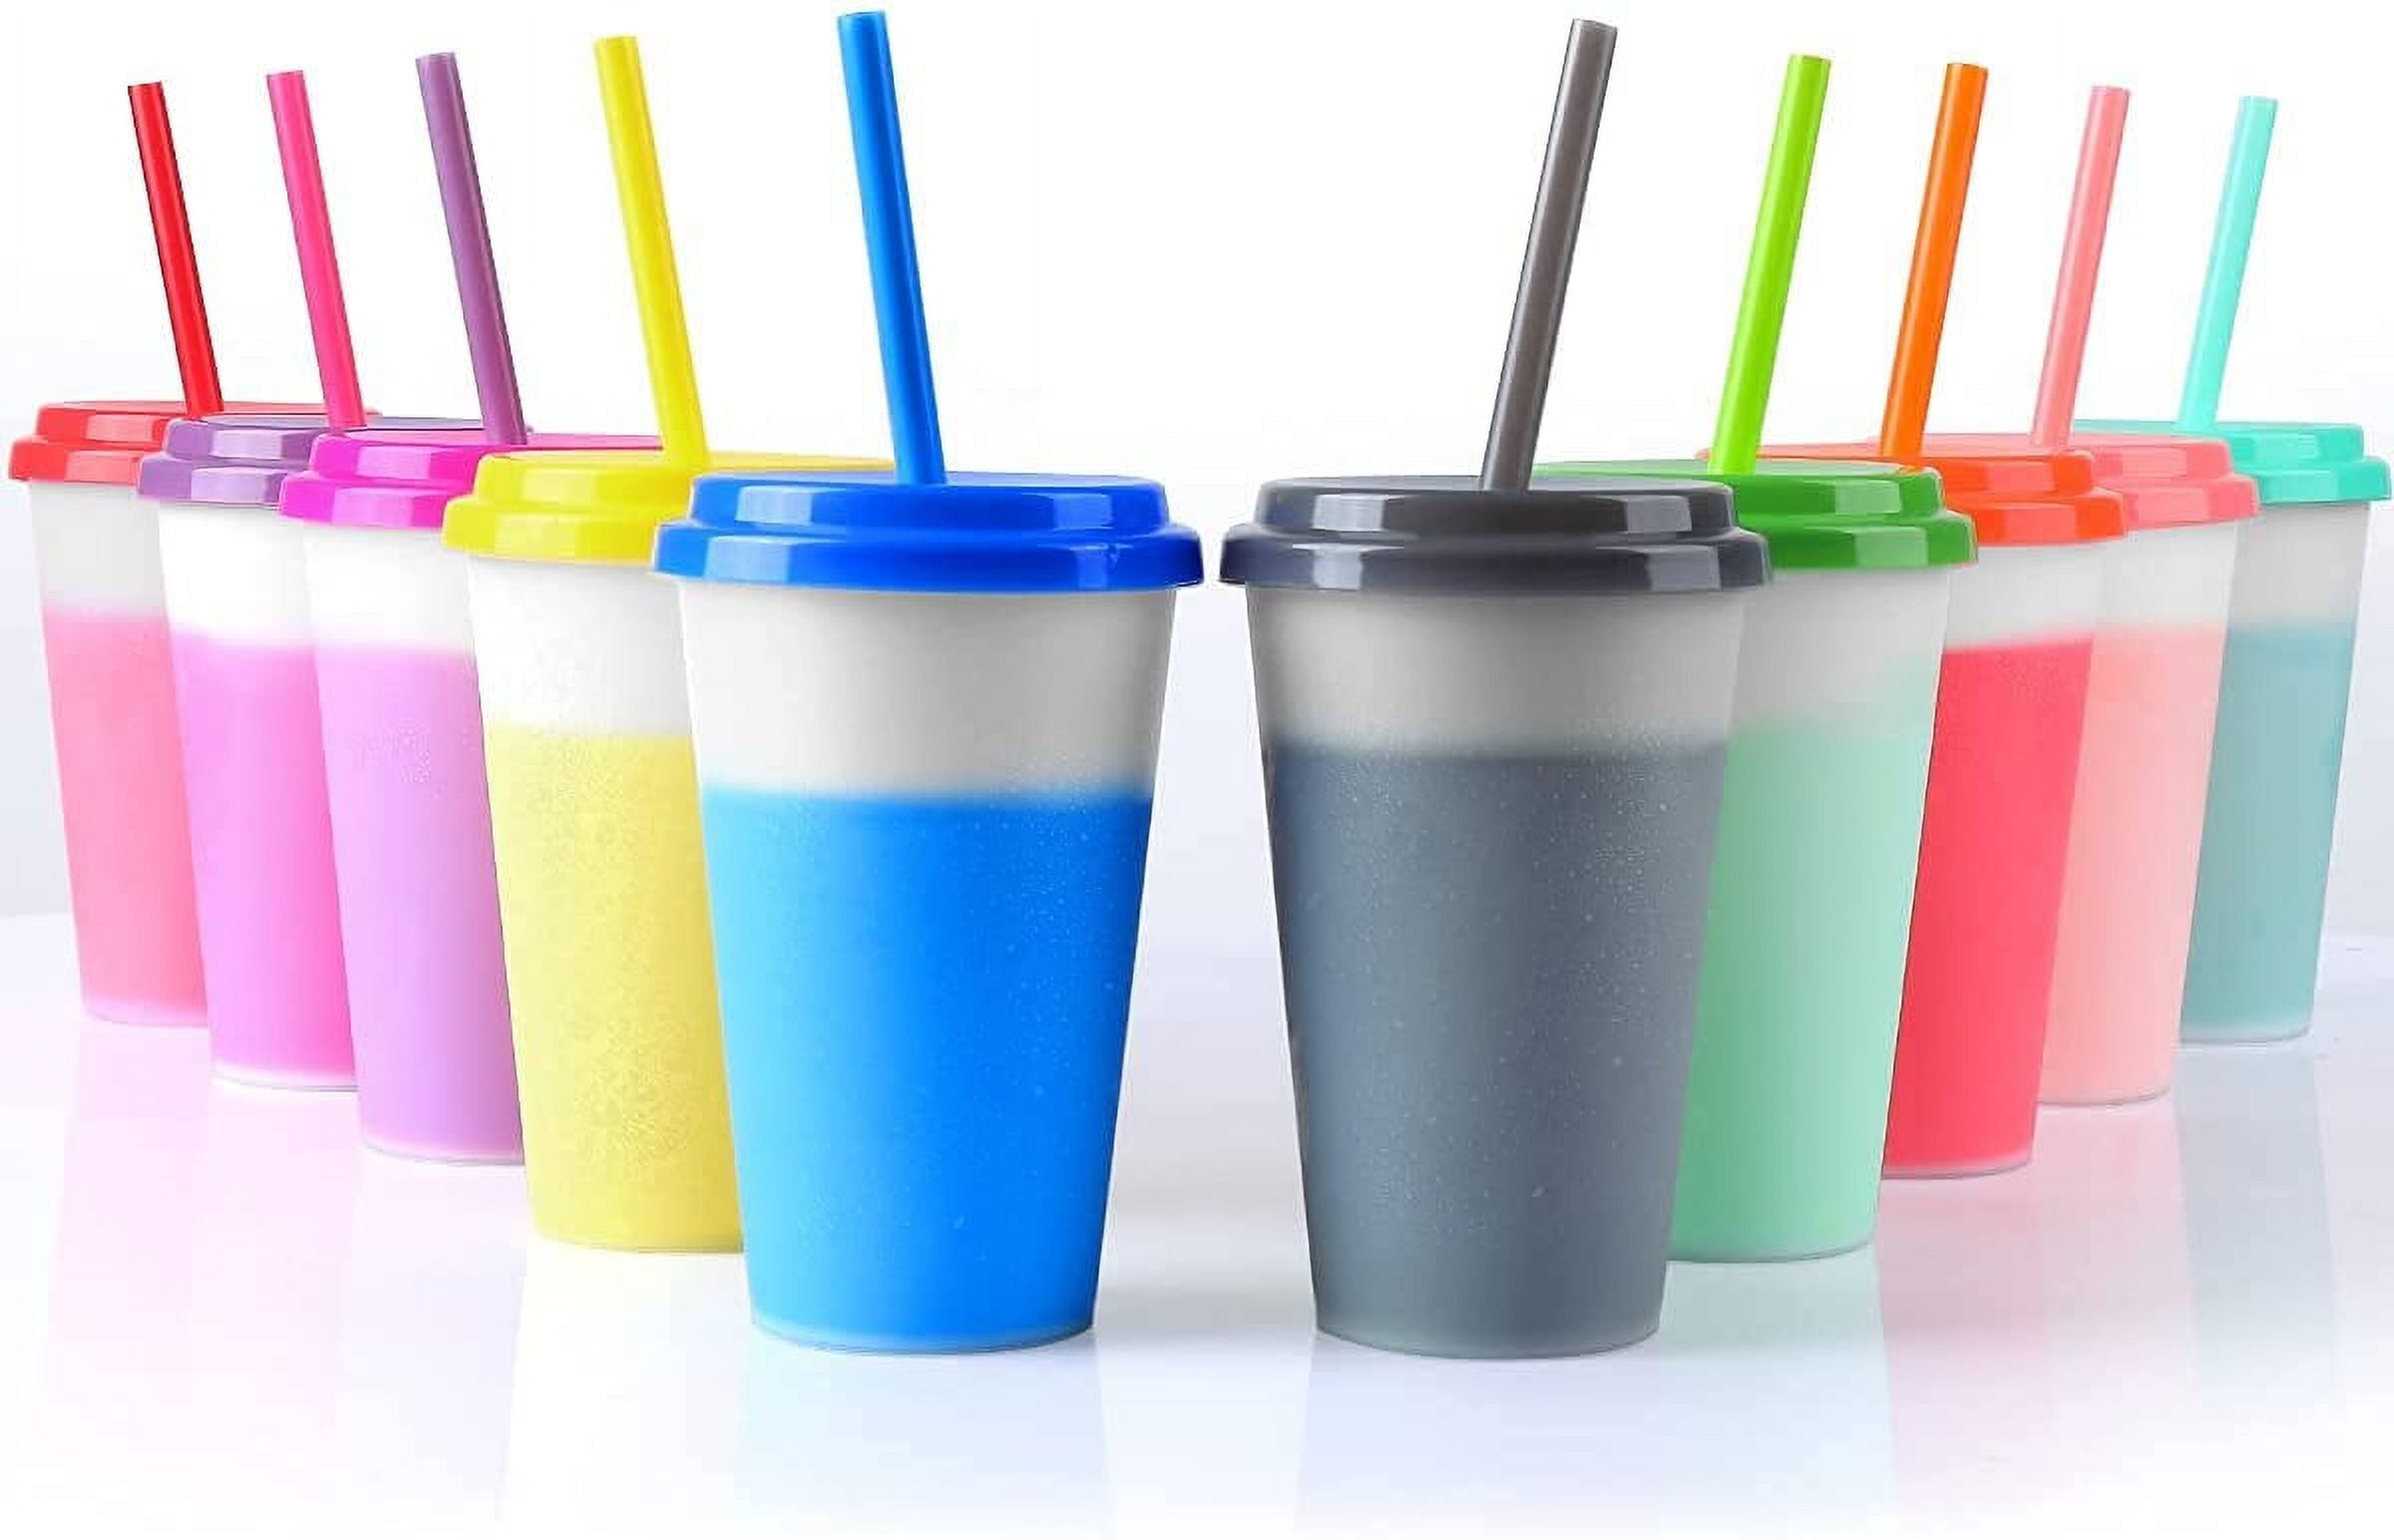  Youngever 7 Sets Plastic Kids Cups with Lids and Straws, 7  Reusable Toddler Cups with Straws in 7 Coastal Colors : Health & Household